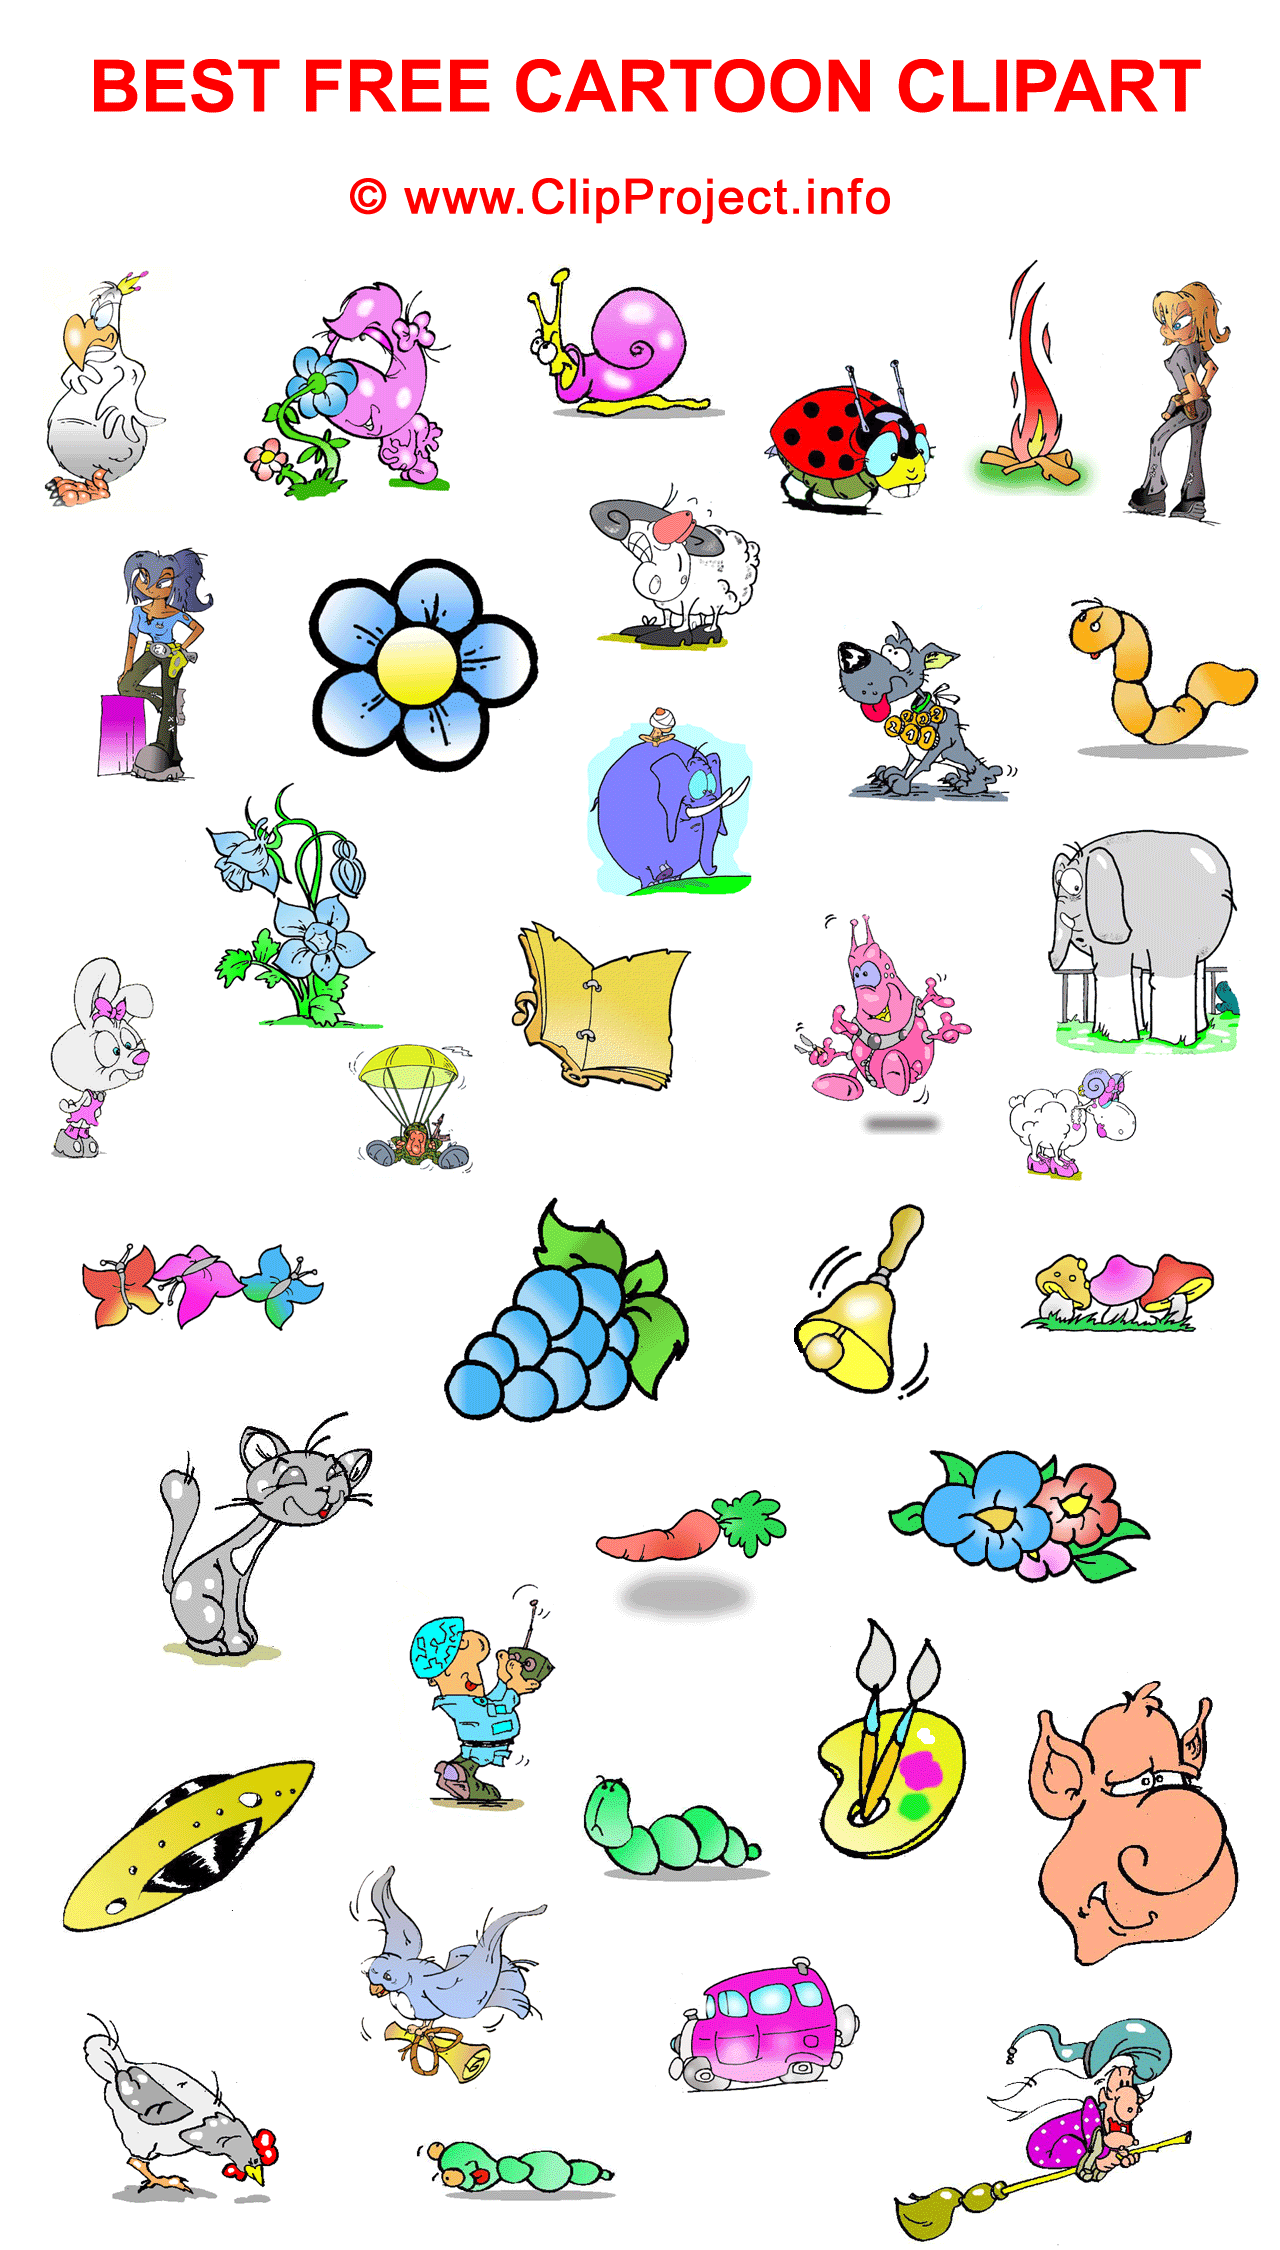 clipart gallery free download - photo #1